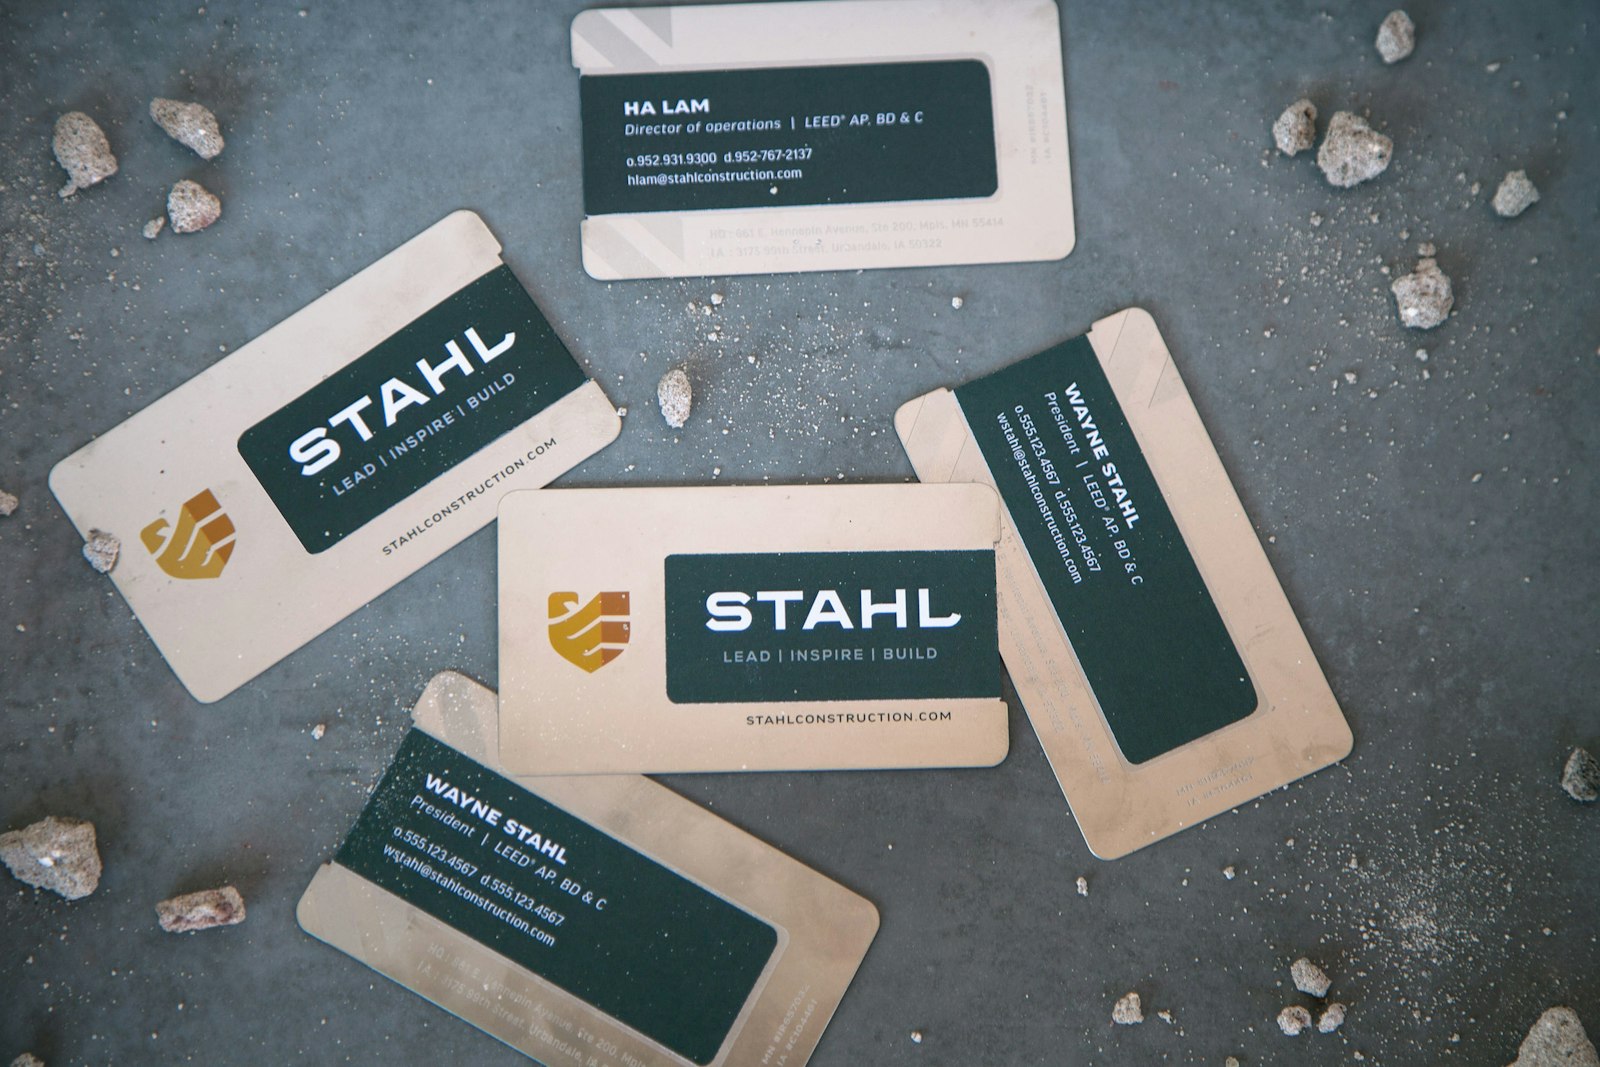 The Stahl Construction brand logo design on business cards in random pattern.